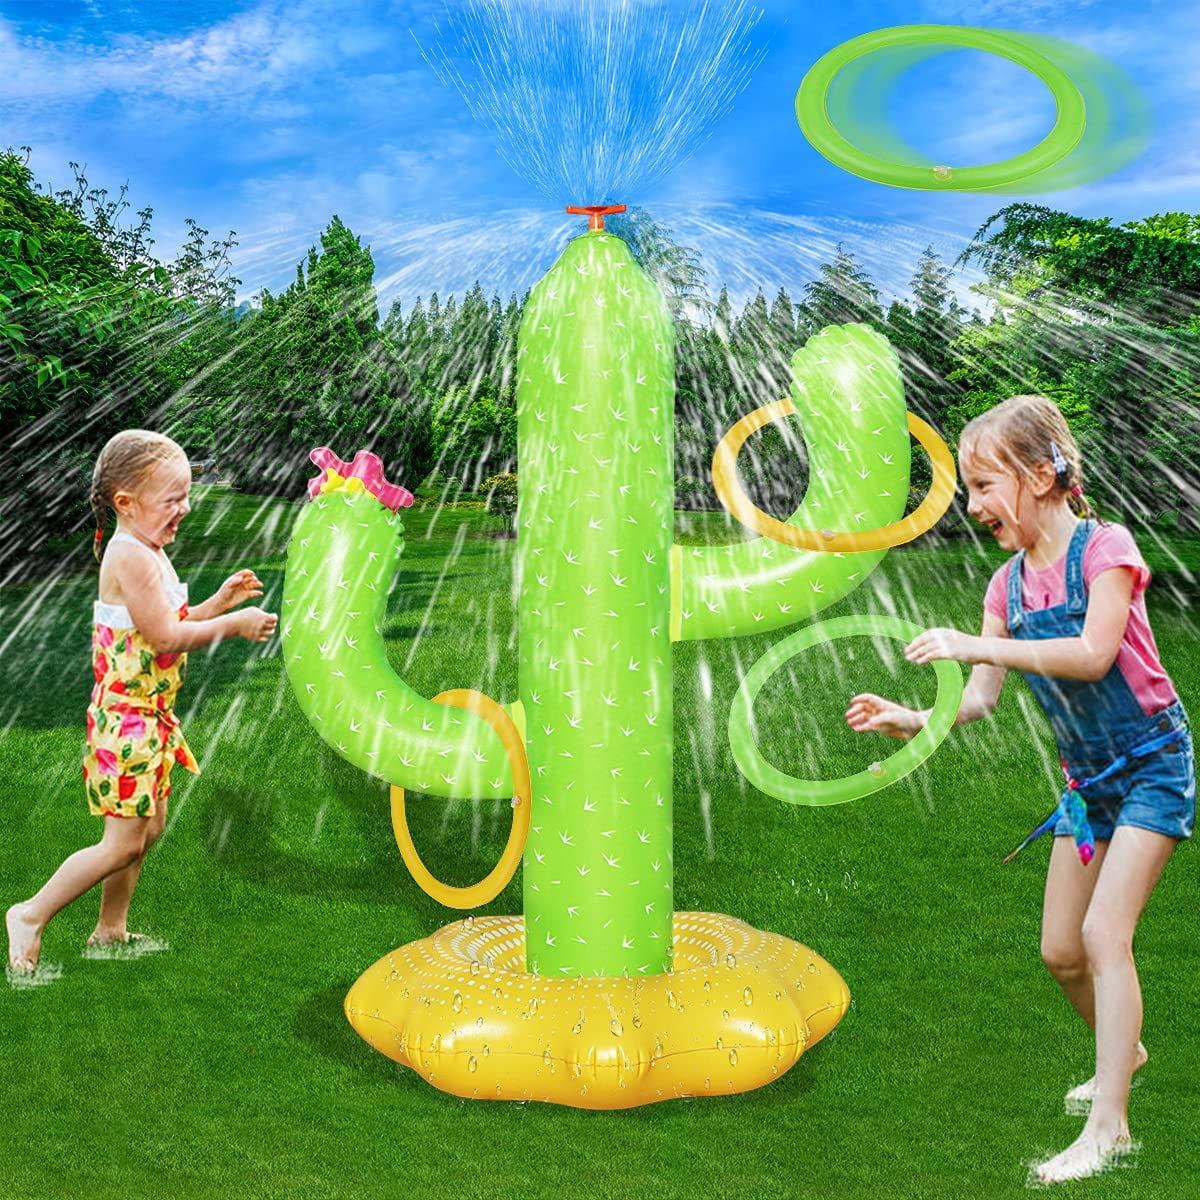 3 and Summer with for Kids, Outdoor Cactus Spray Children Sprinkler Cactus for Backyard Game 6 U 5 for Toy Water 4 Girls, Rings, Sprinkler Fun Boys Water Gifts Years Ages Toys 4 Inflatable